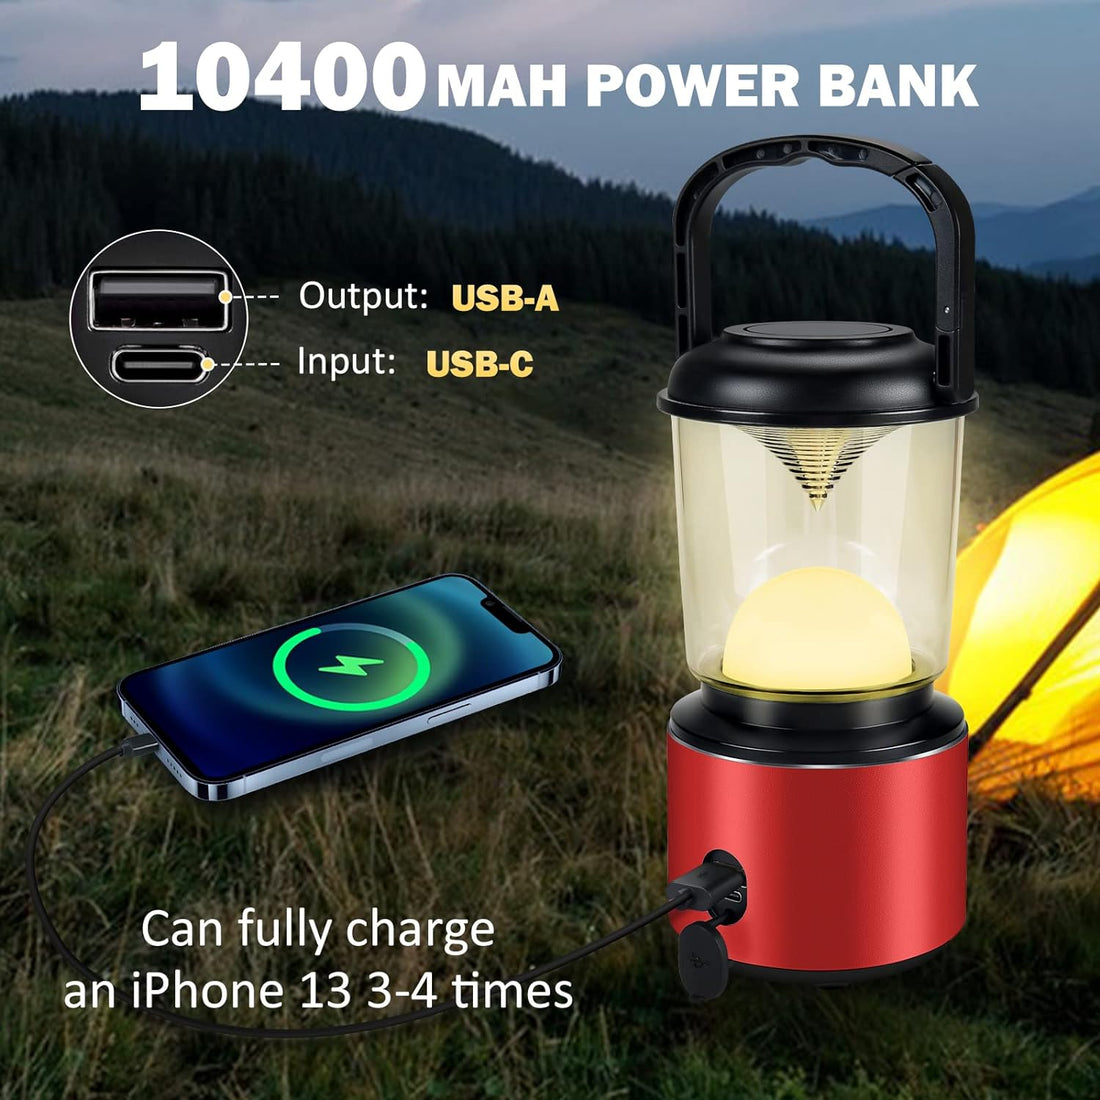 Yonktoo LED Camping Lantern Rechargeable, 10400 Capacity Power Bank, Lanterns Flashlight with 5 Light Modes and LCD Screen, Aluminum Alloy Shell, USB Lanterns for Power Outages, Emergency, Hiking